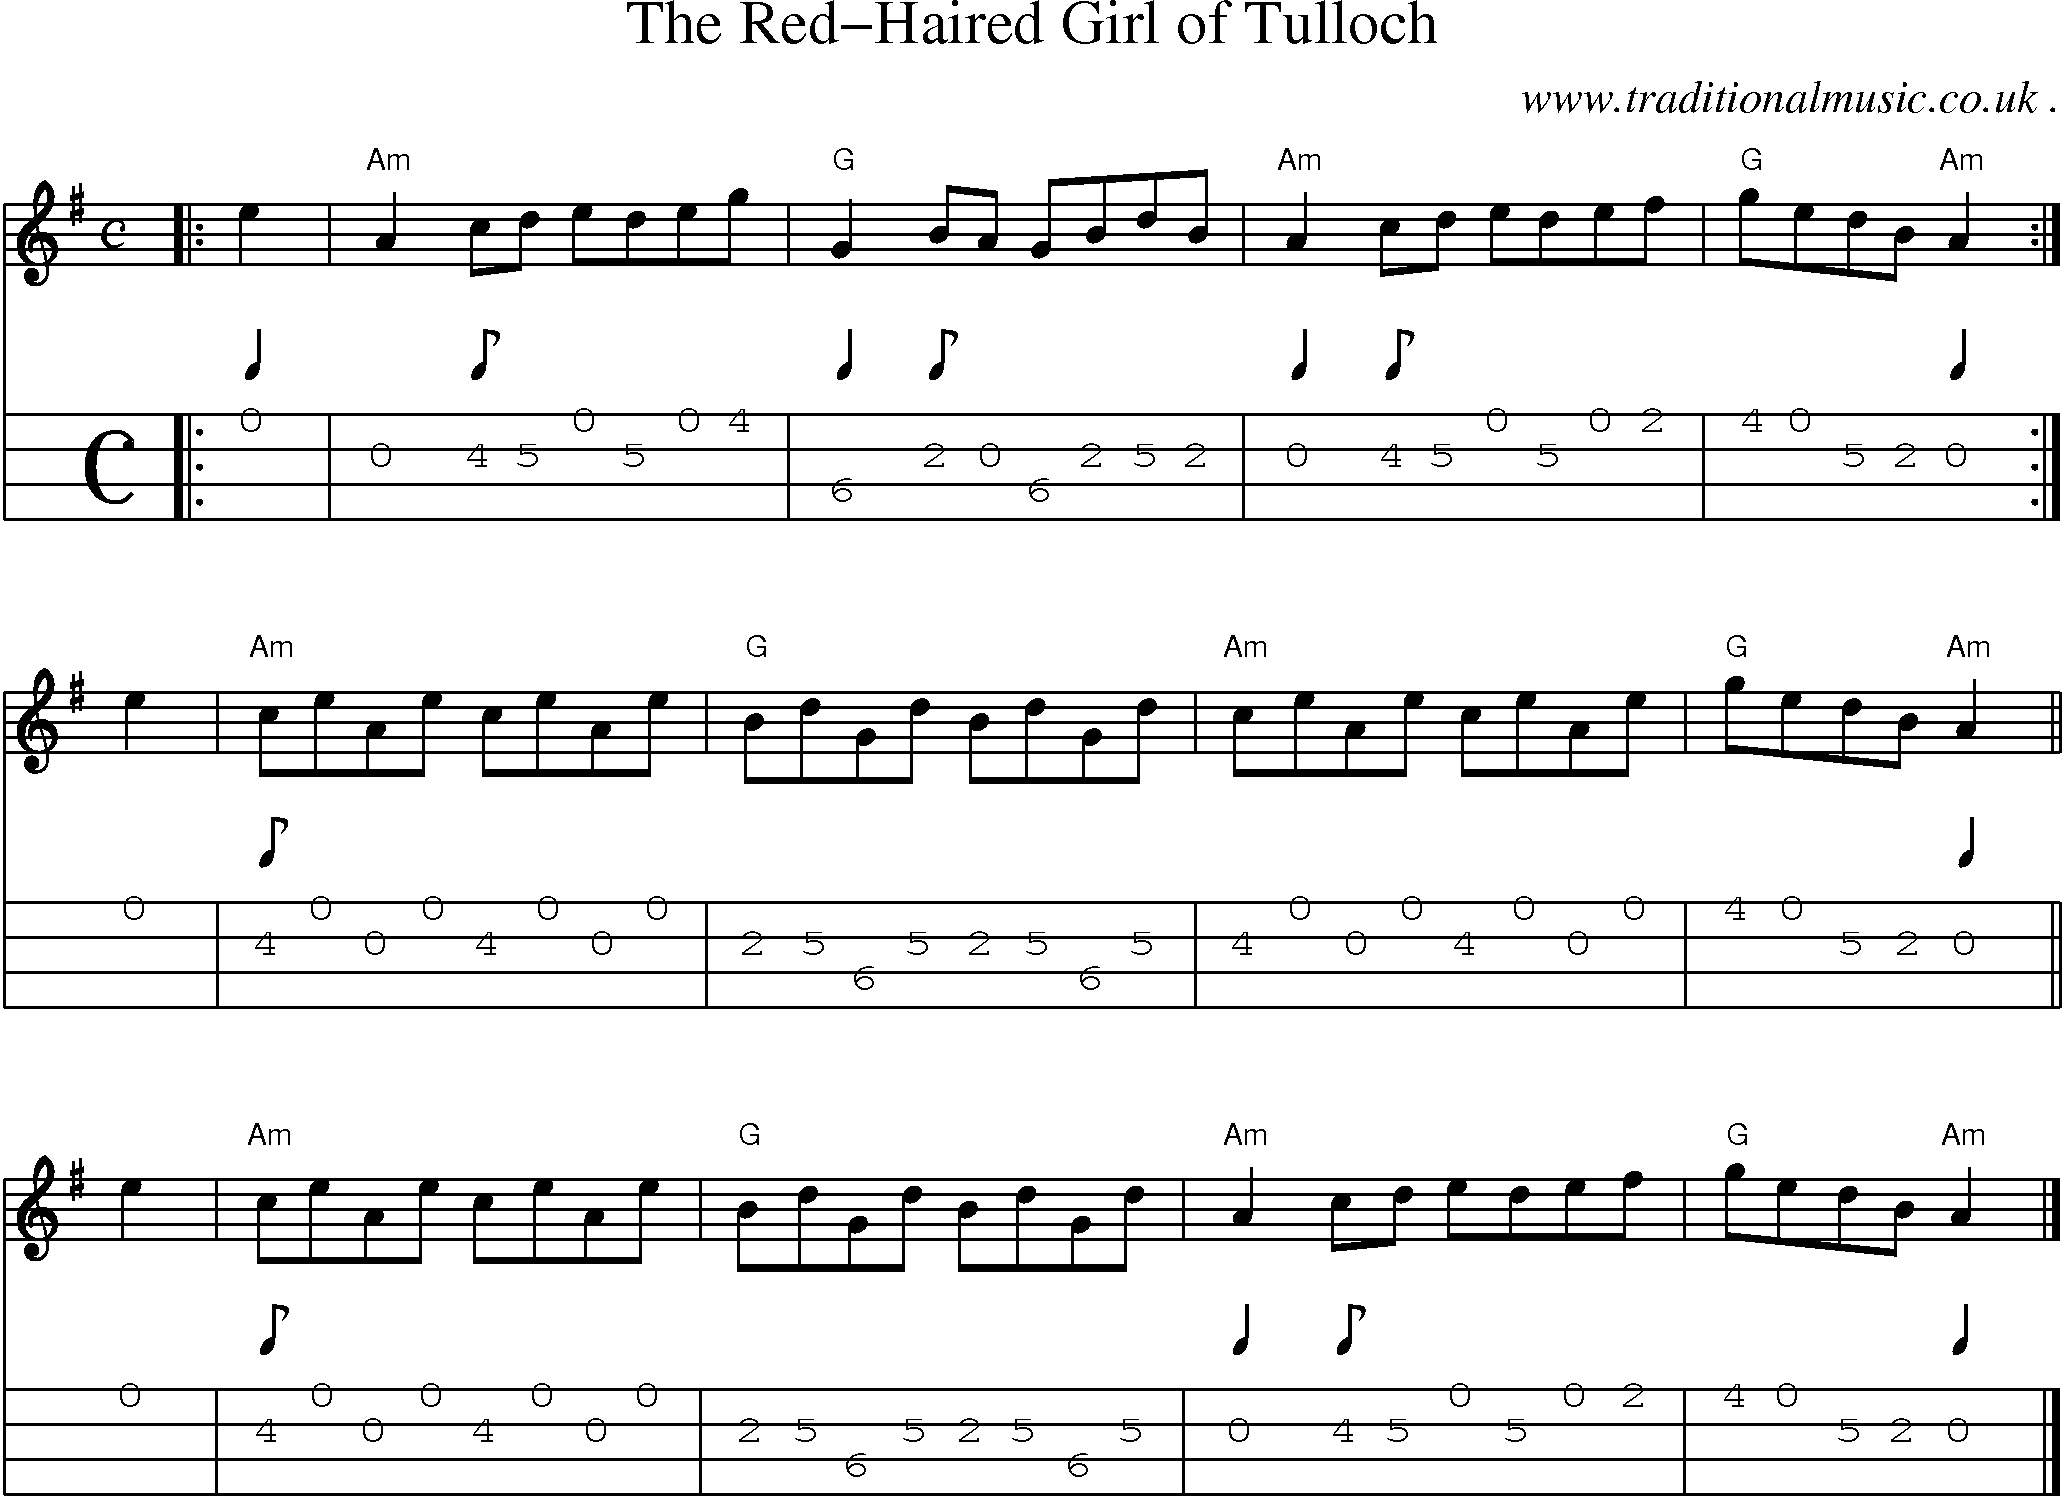 Sheet-music  score, Chords and Mandolin Tabs for The Red-haired Girl Of Tulloch